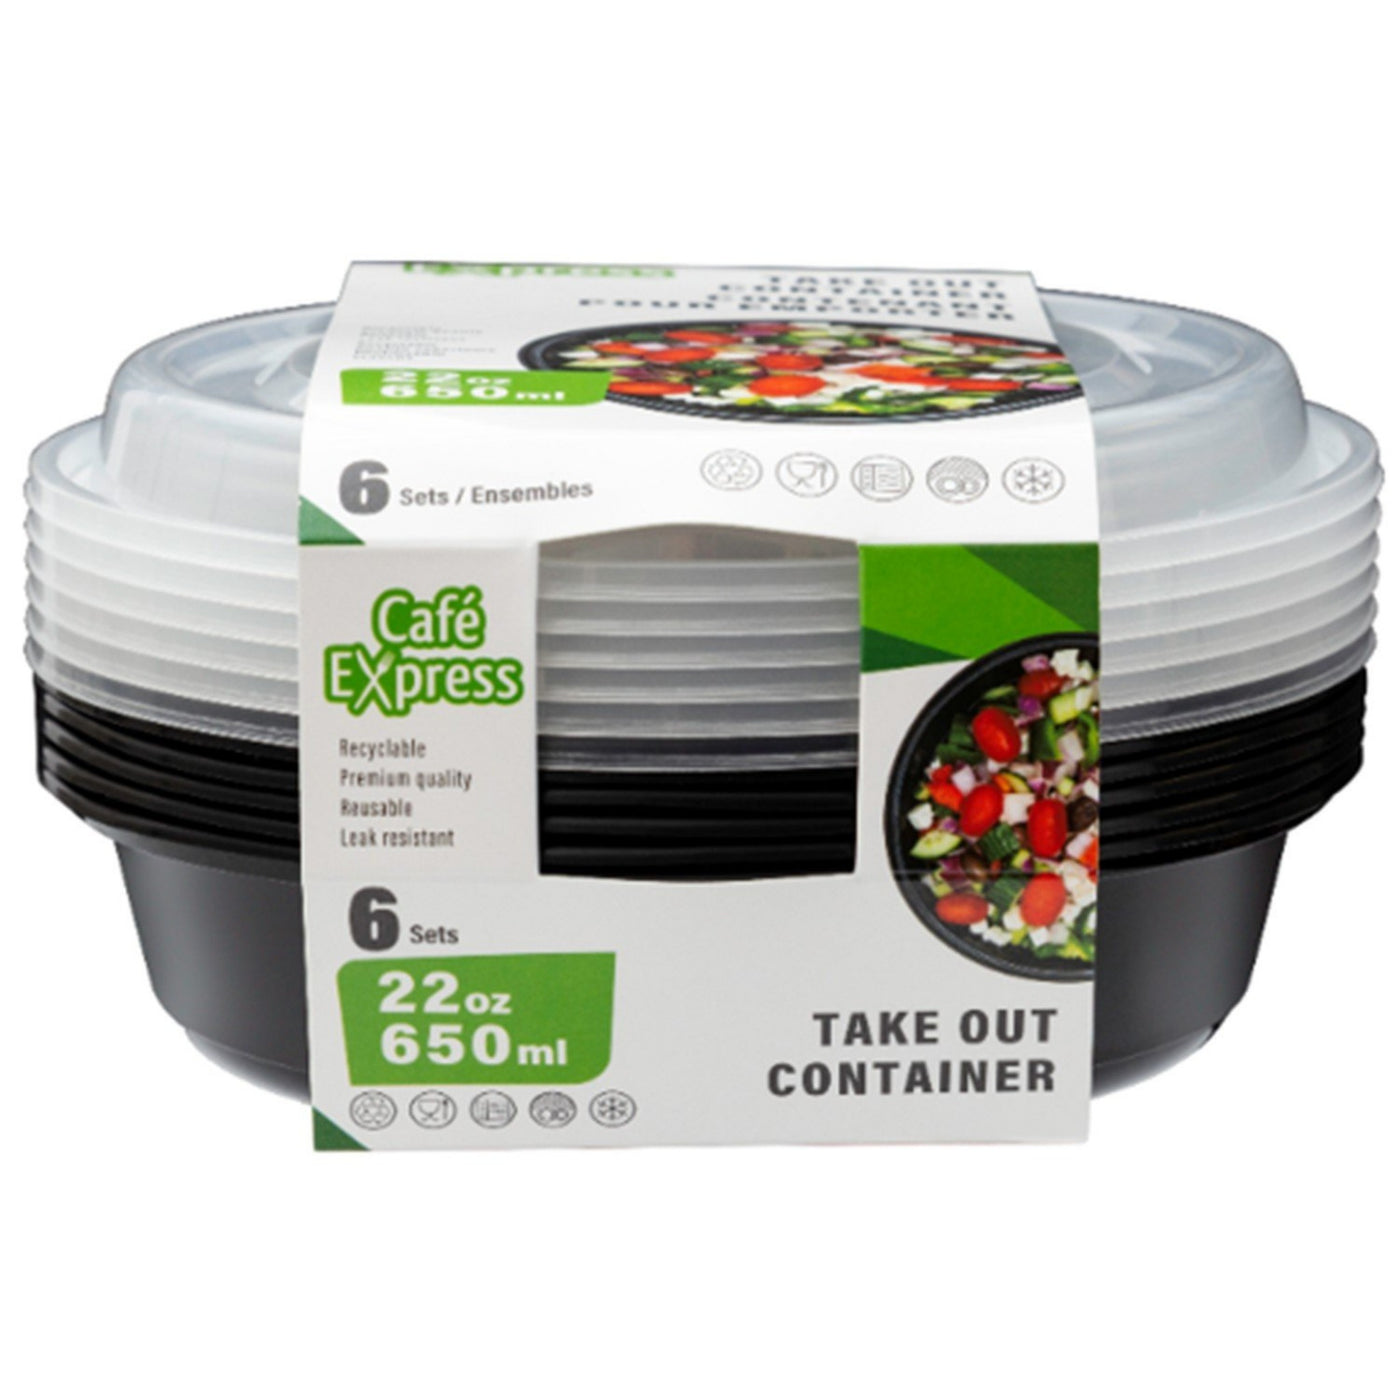 Take out container 22oz